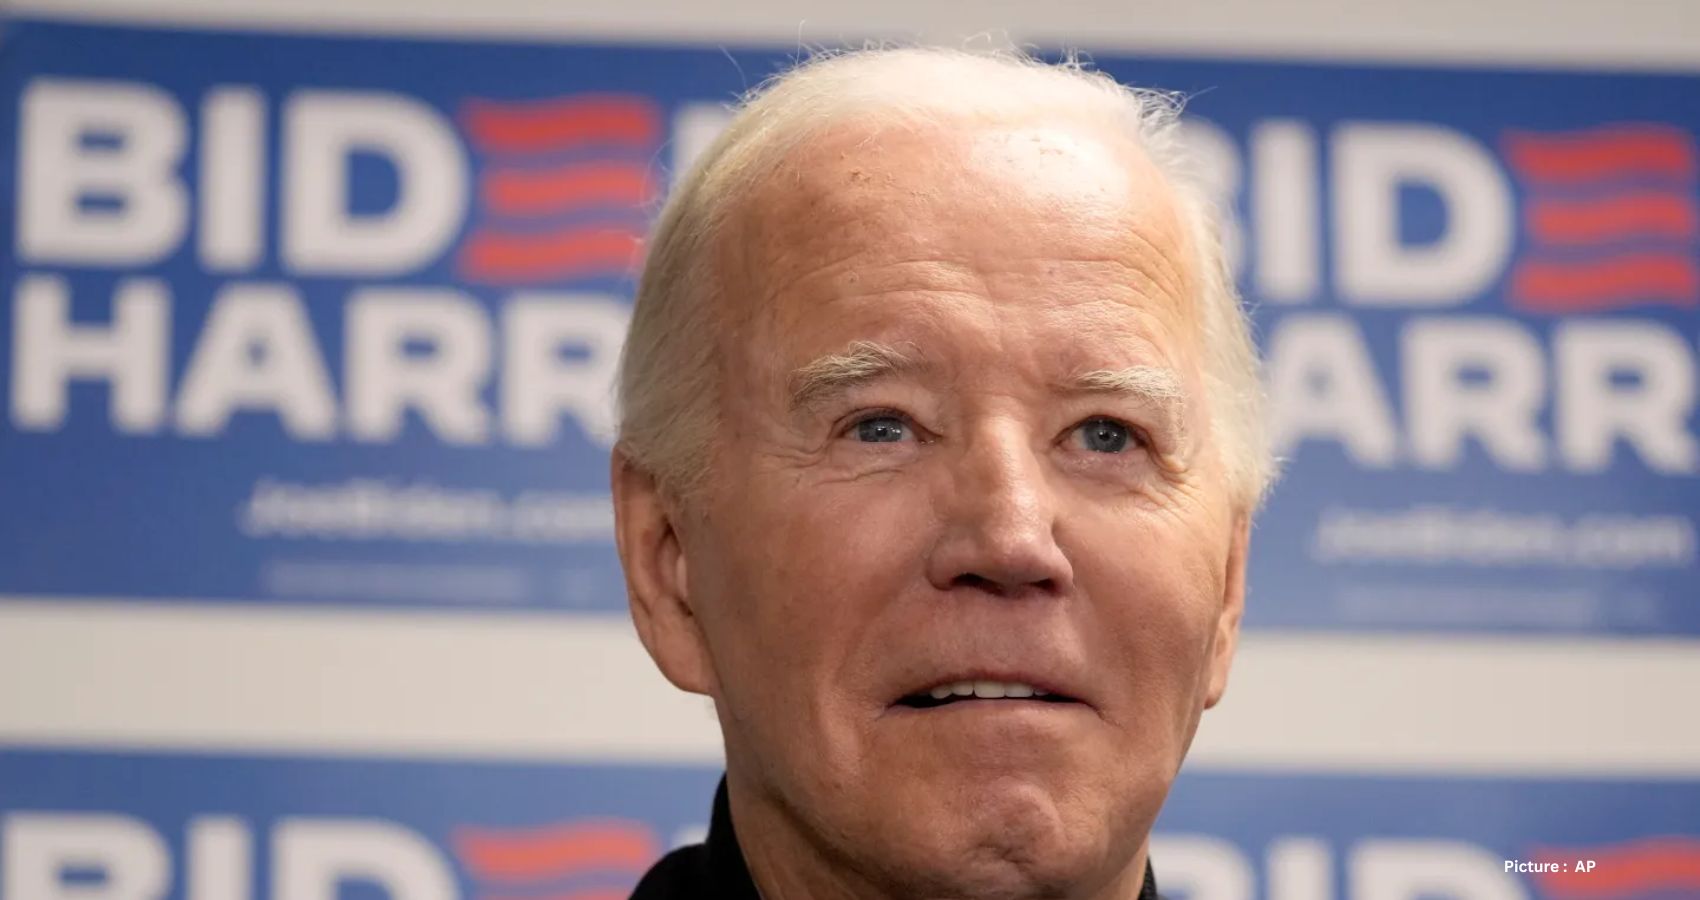 President Biden Triumphs in South Carolina Democratic Primary, Solidifies Support Among Black Voters